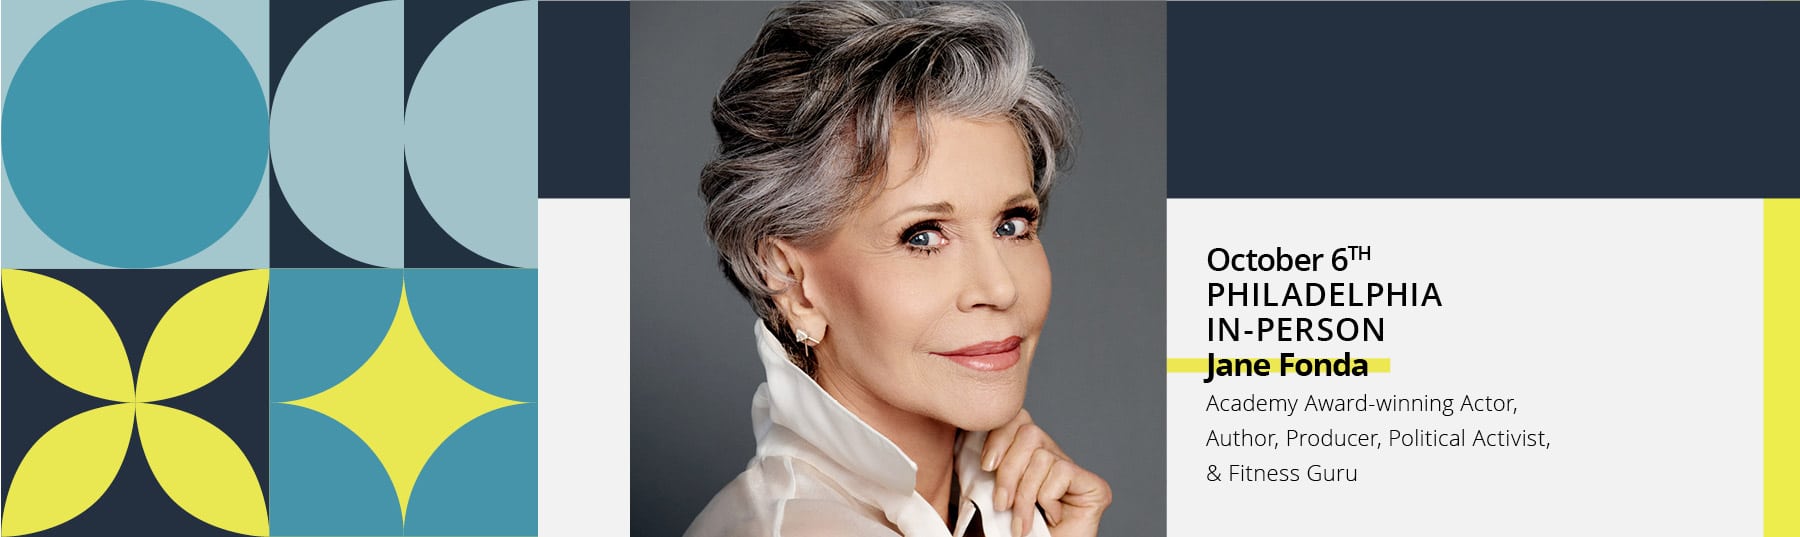 Join Jane Fonda in-person at the PA Conference for Women on October 6th!